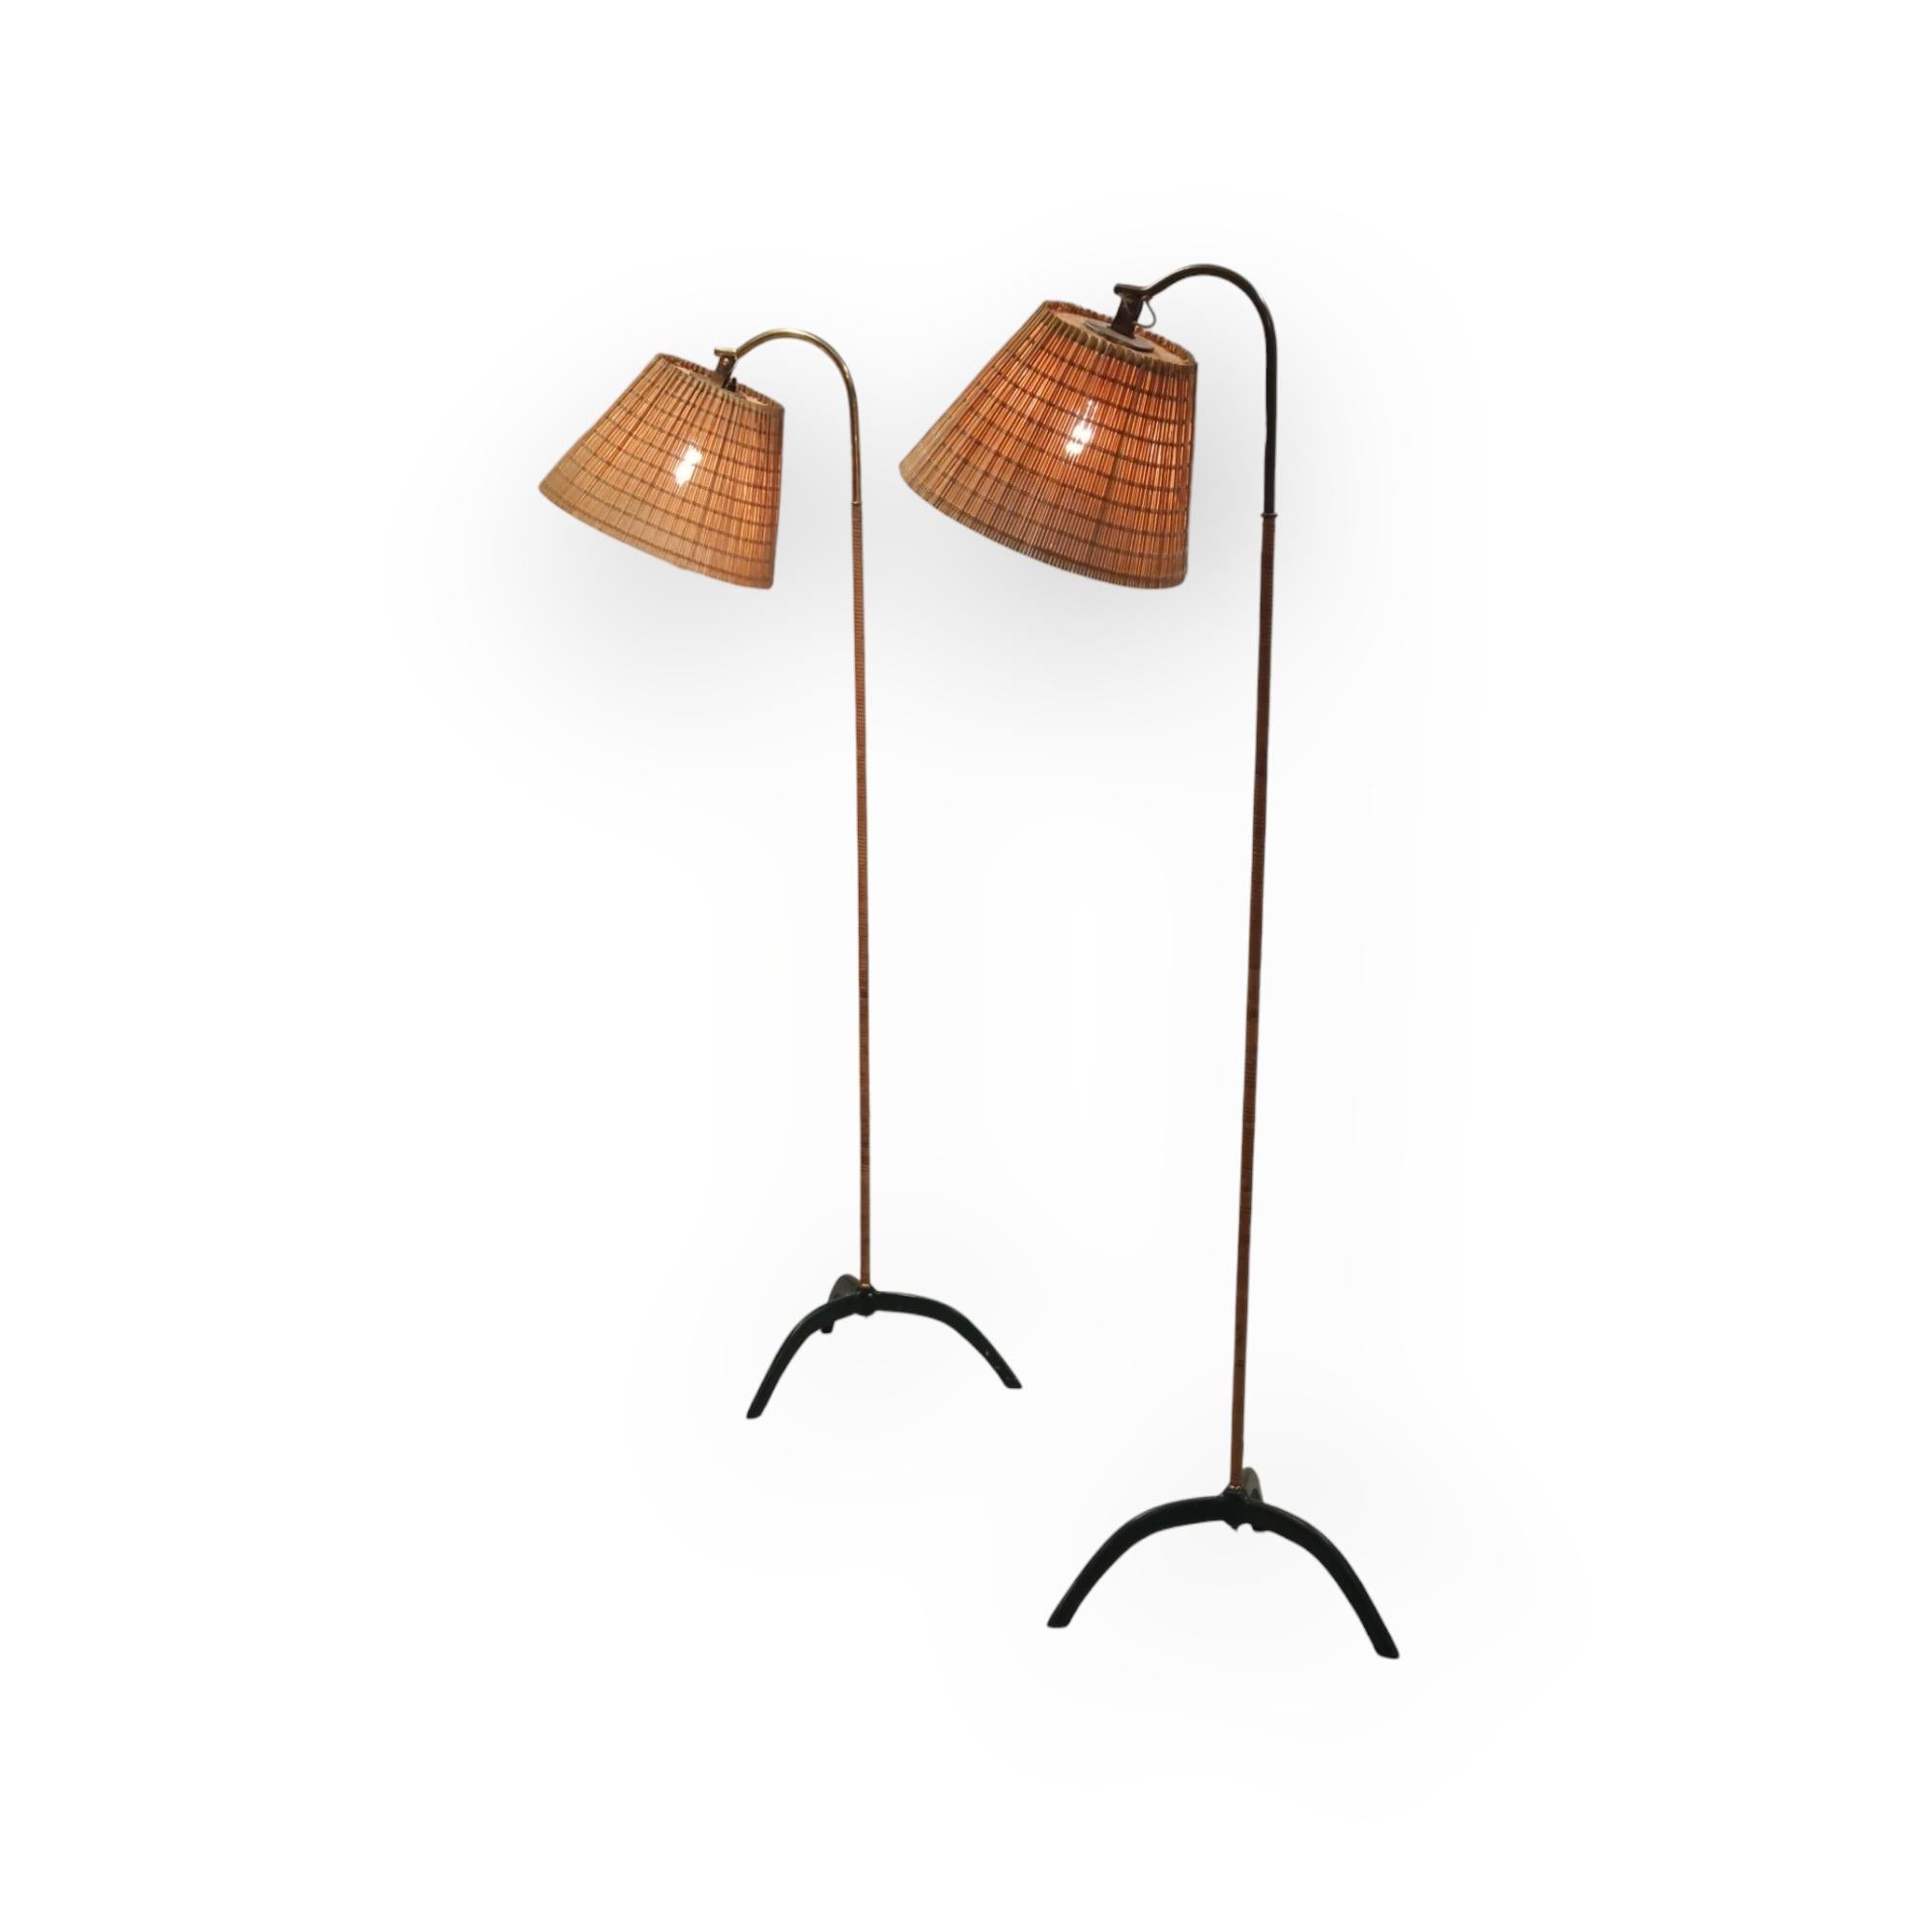 A Pair of Paavo Tynell Floor Lamps model. 9609, Taito Oy 6